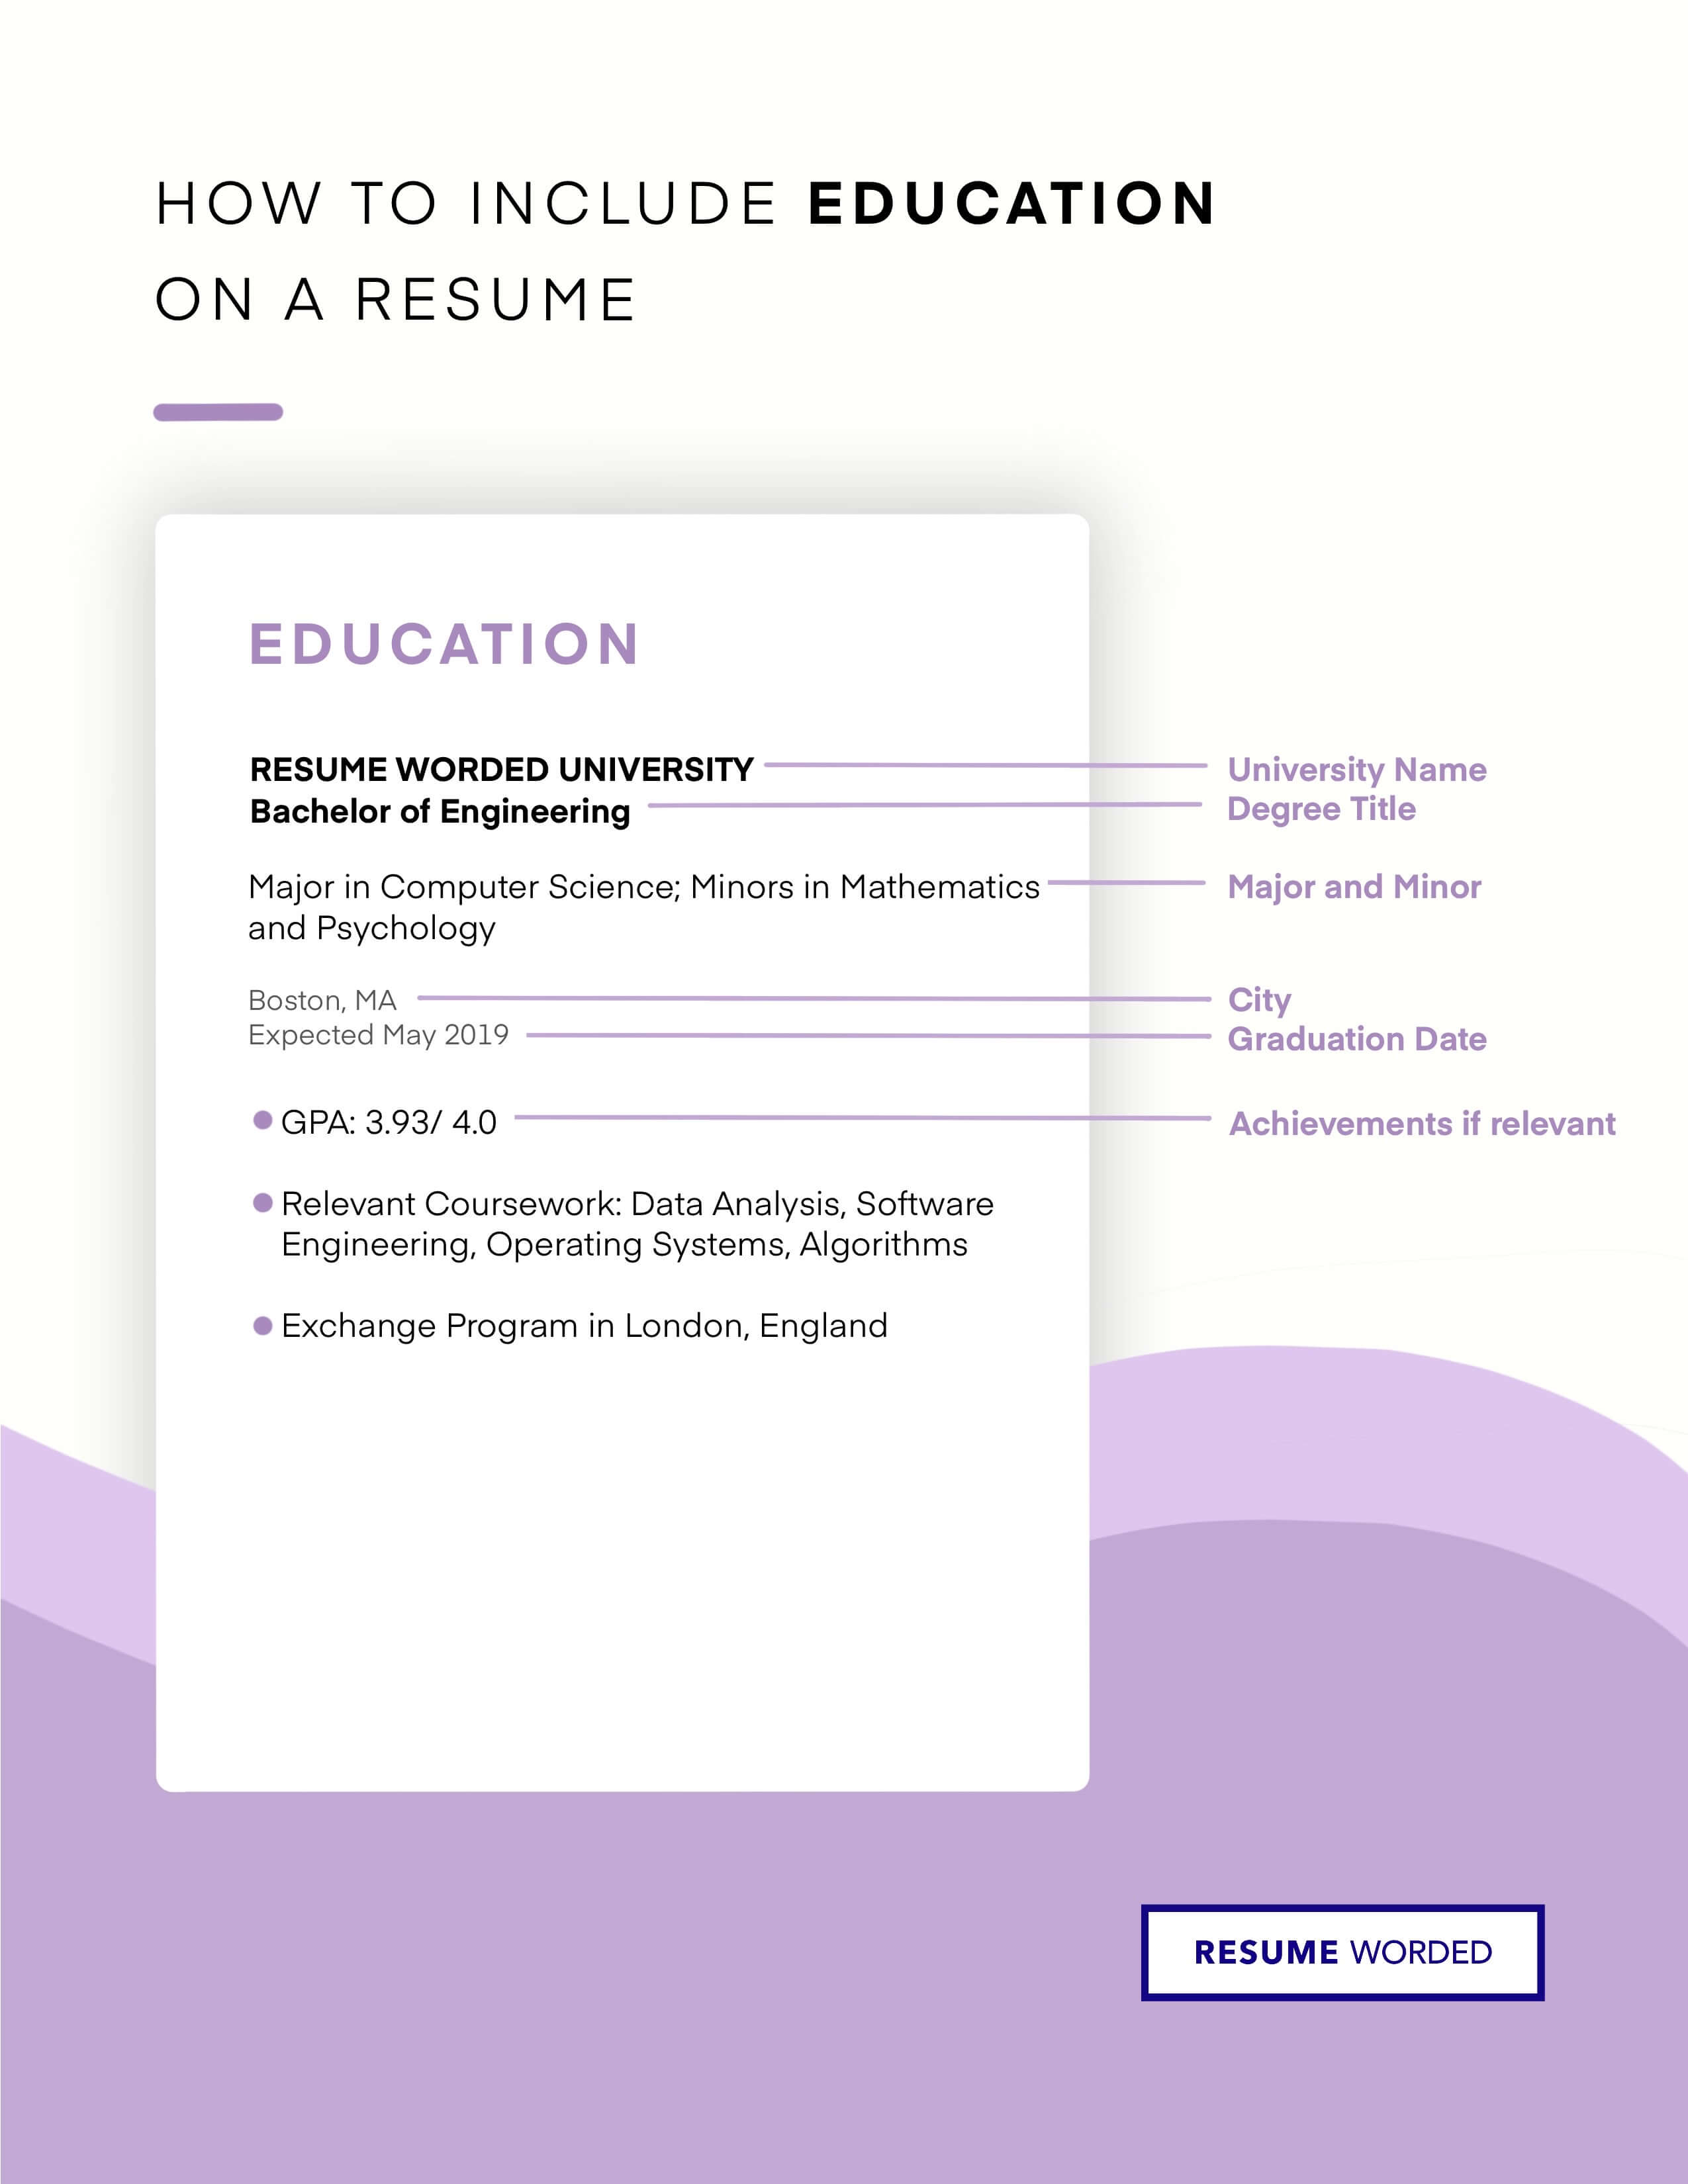 Accentuate your educational background. - Director of Data Analytics Resume